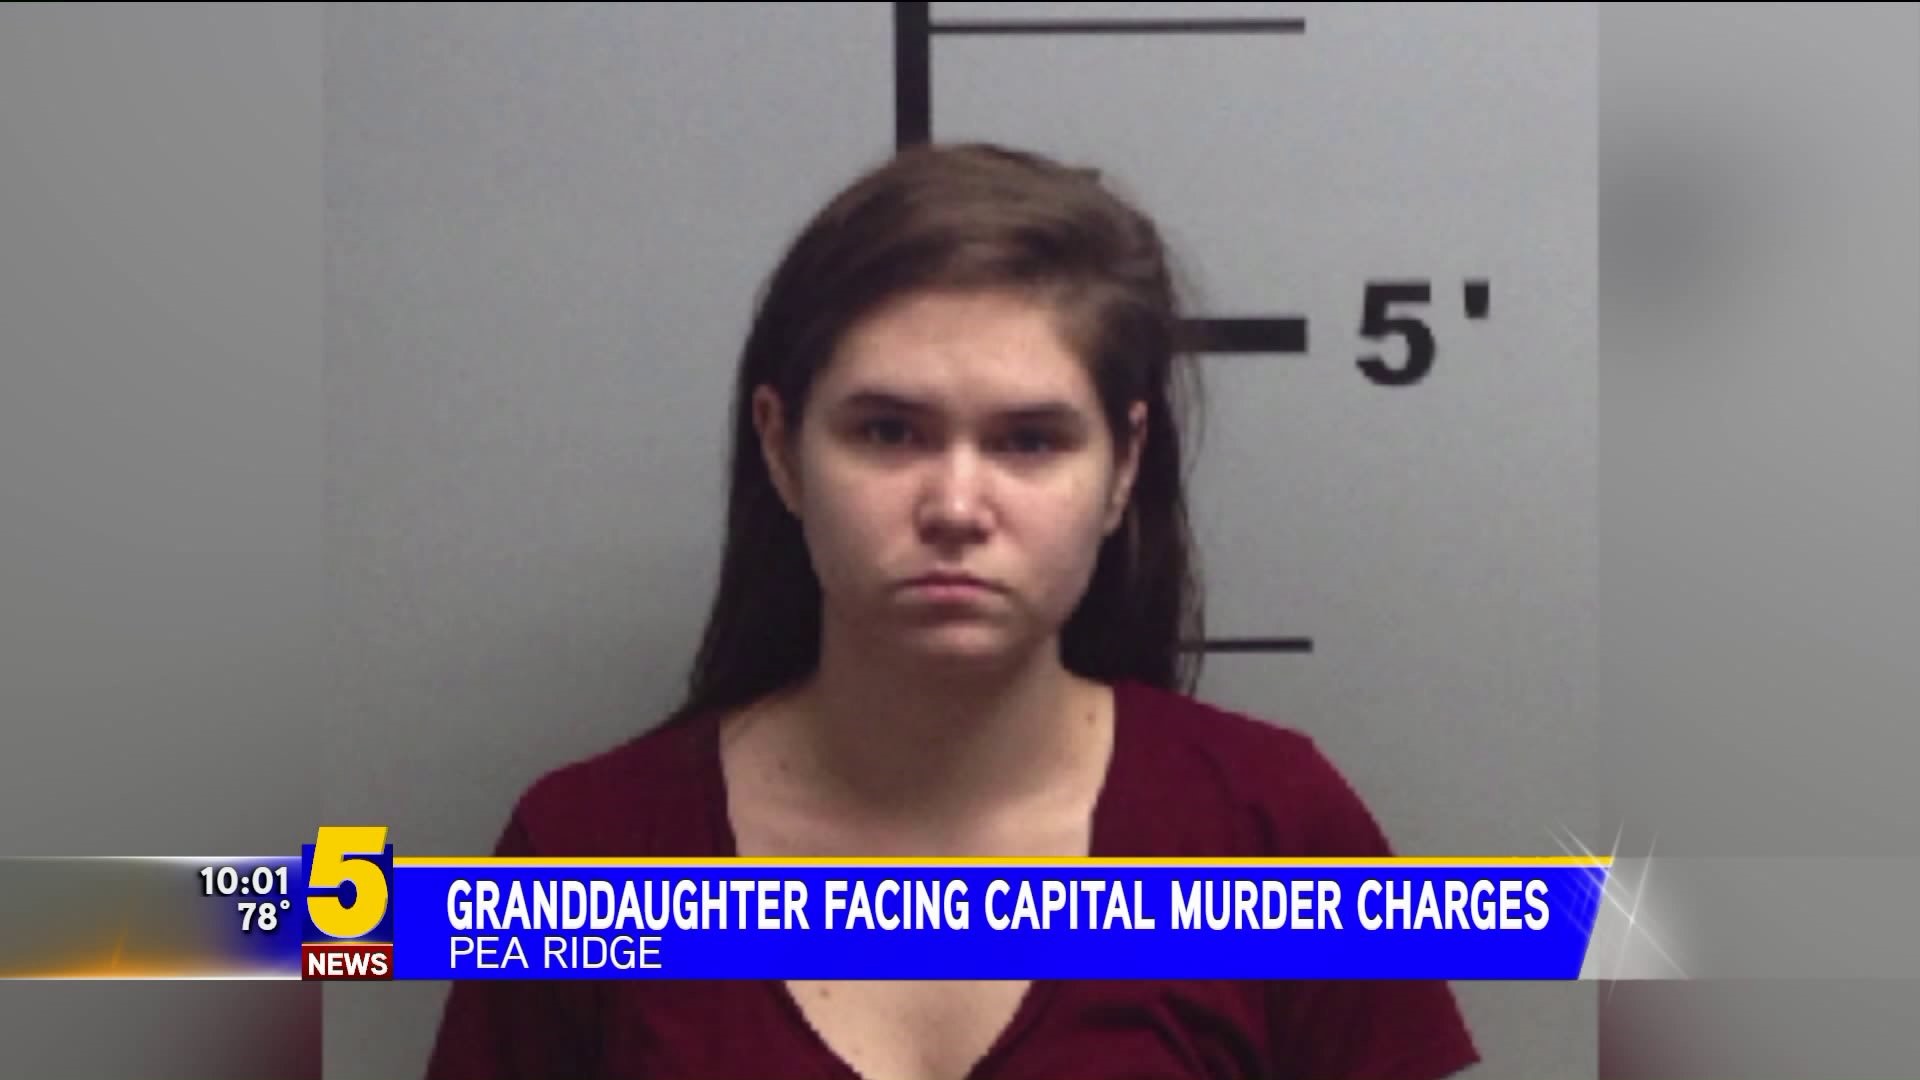 Granddaughter Facing Capital Murder Charges